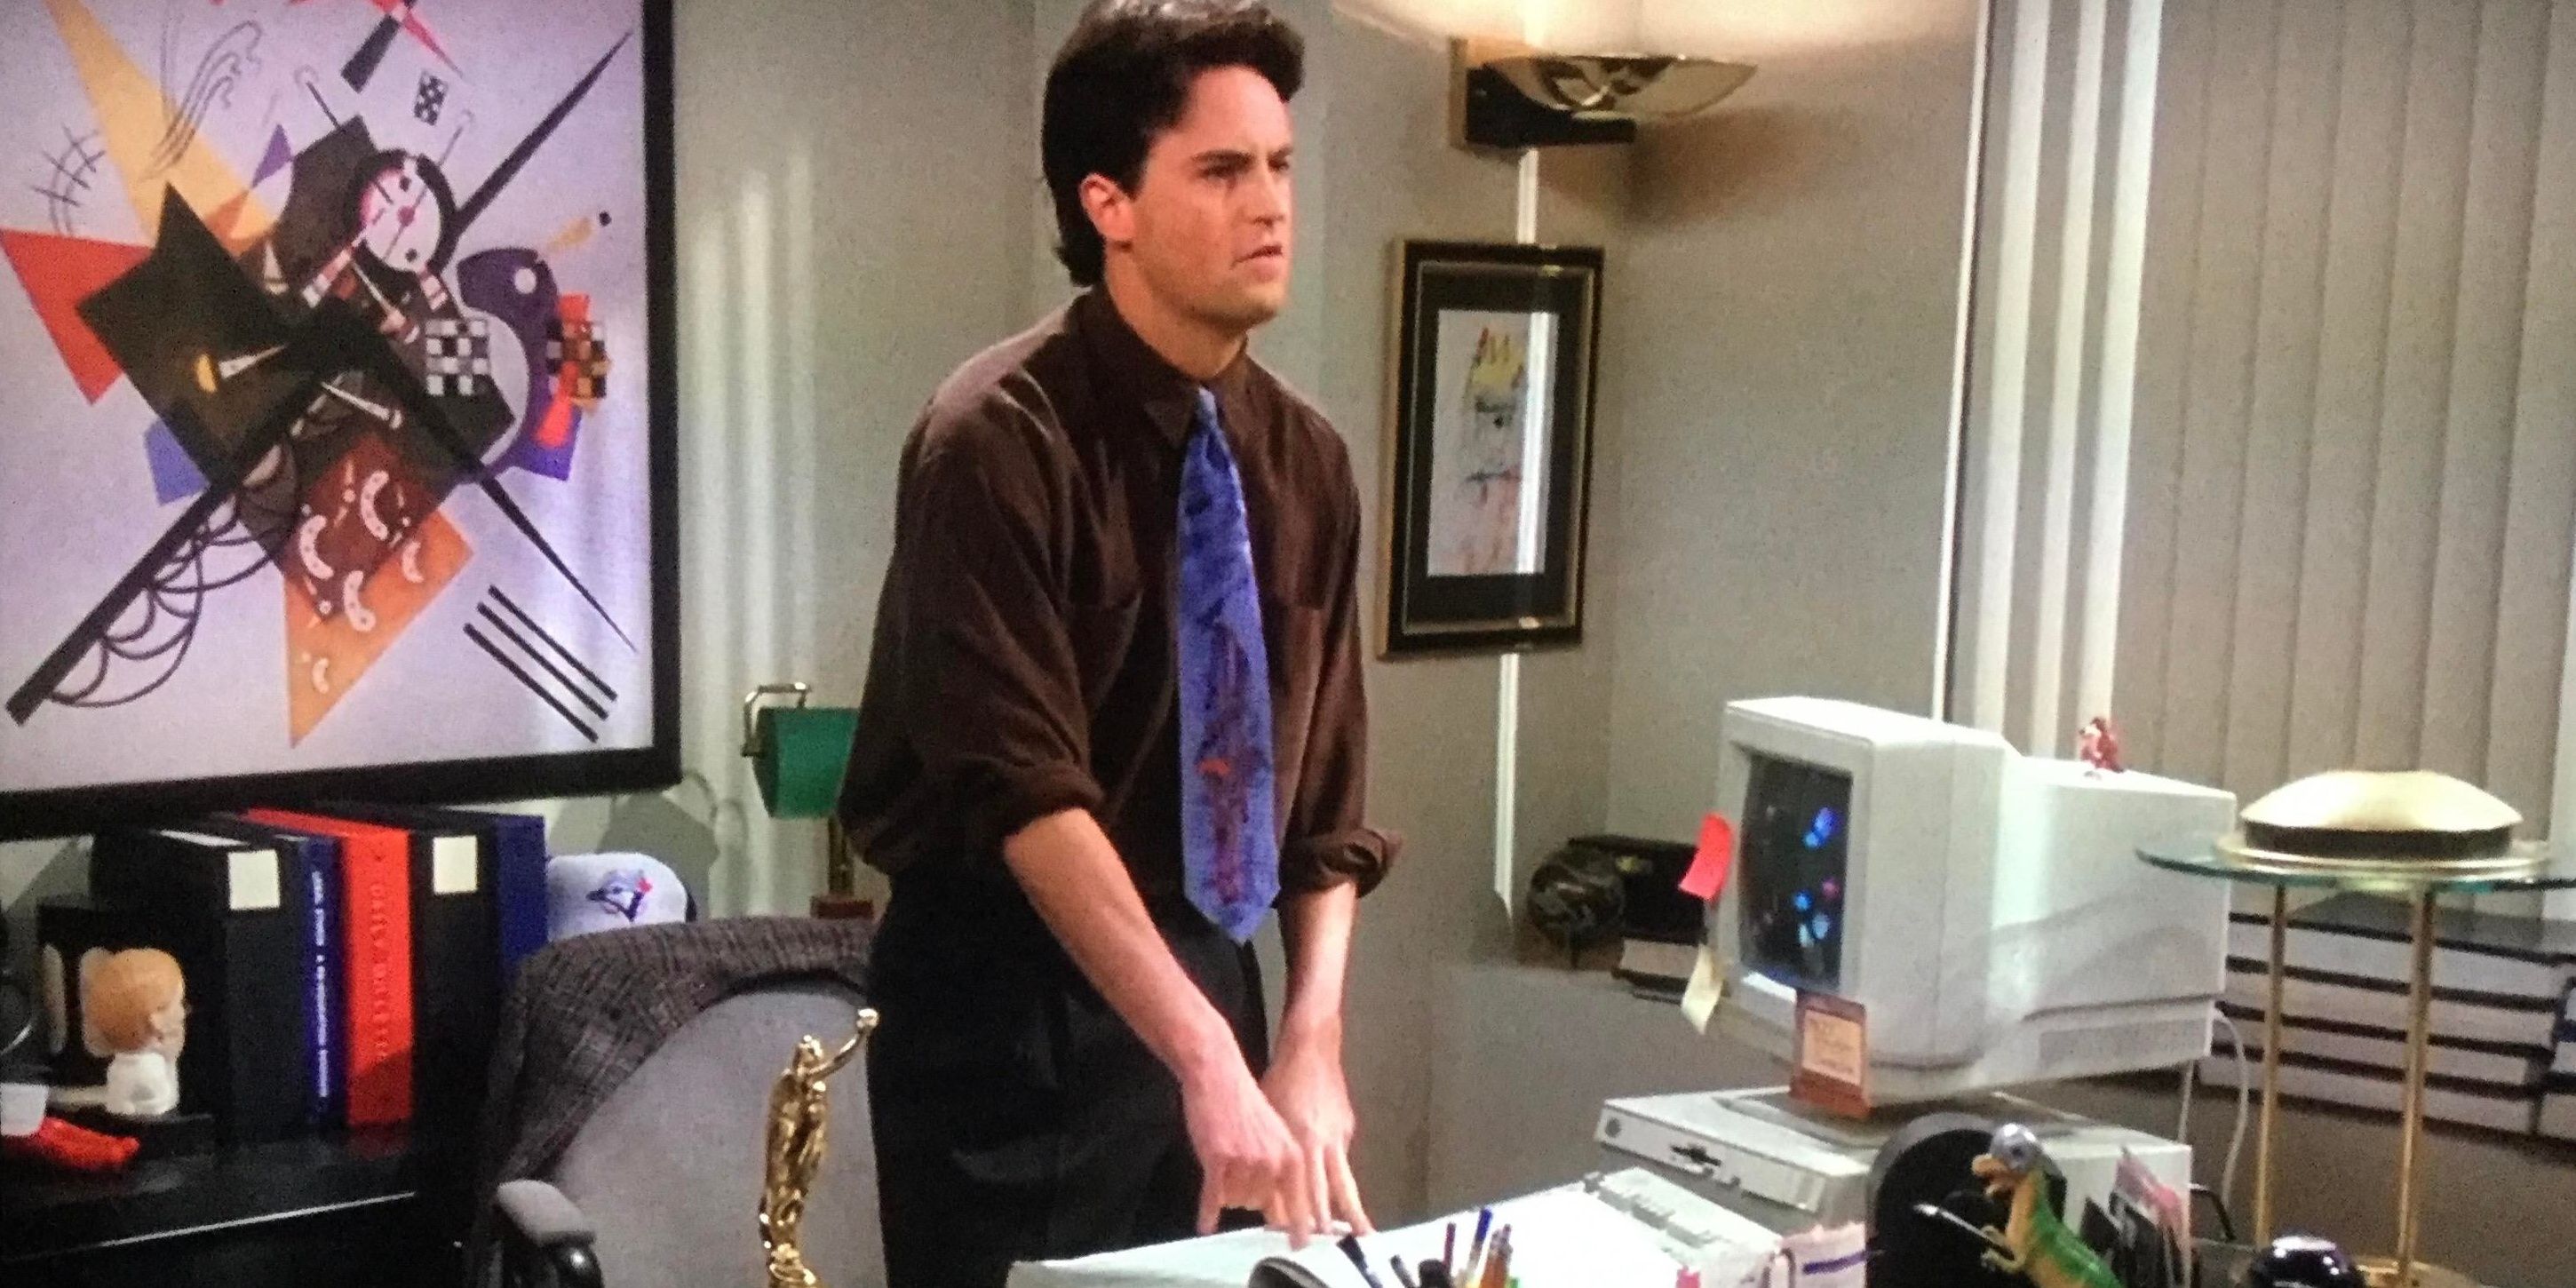 Matthew Perry as Chandler Bing standing next to his desk at work